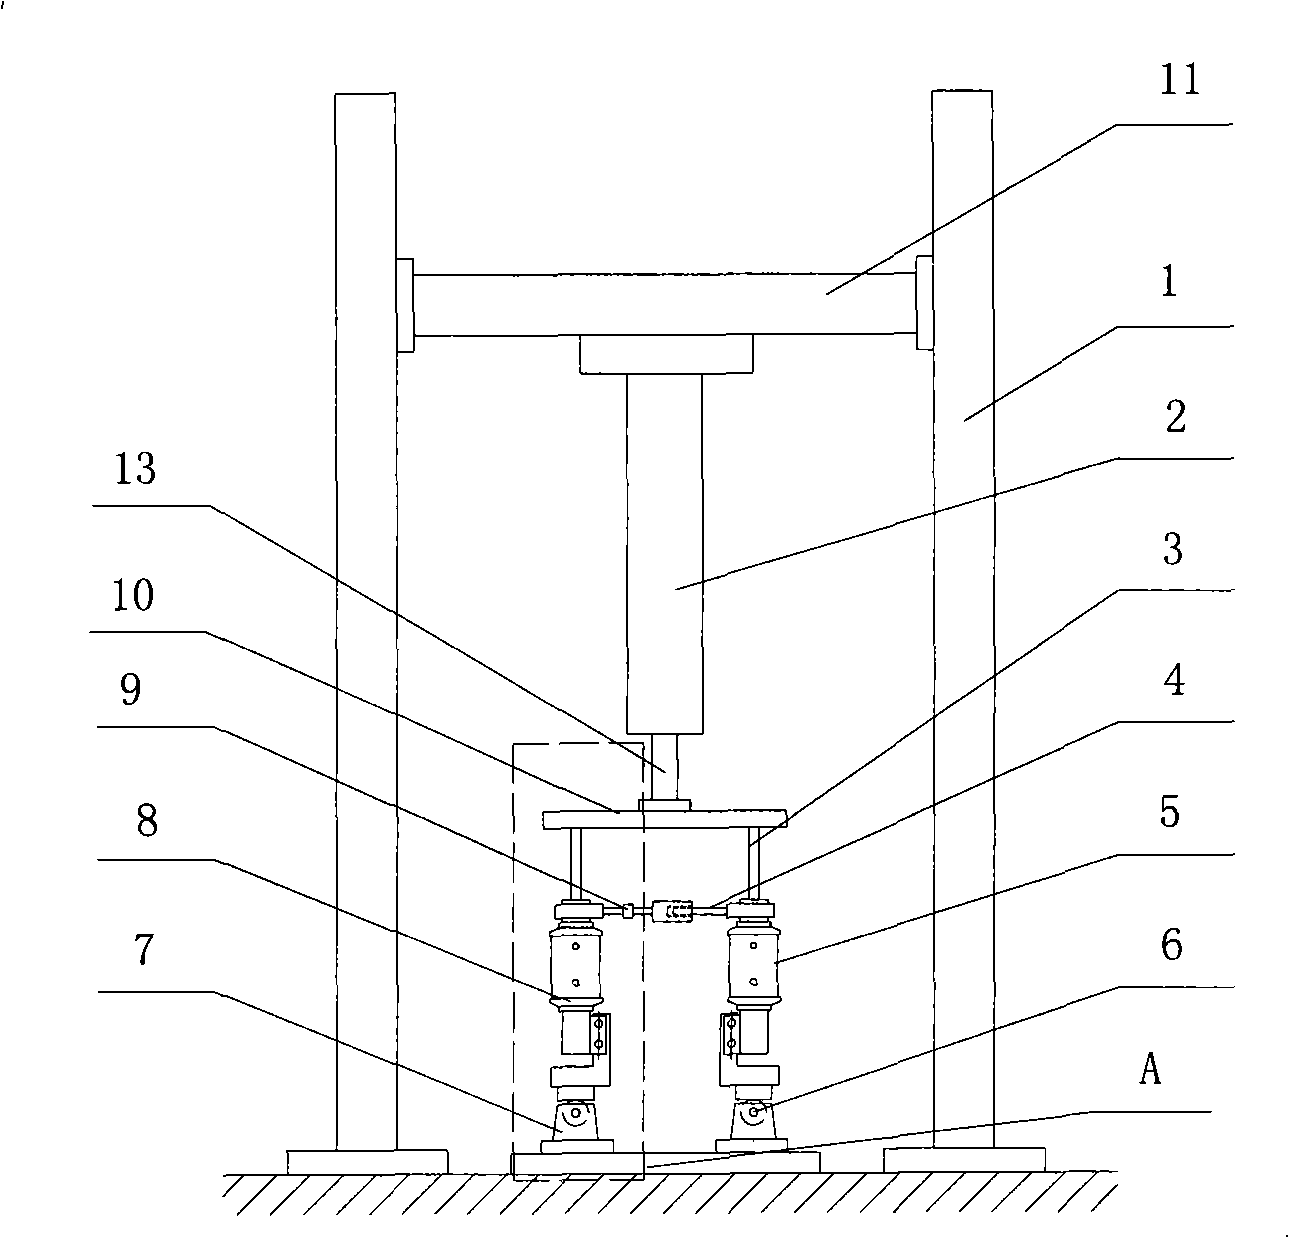 Double-moving endurance experiment apparatus of vibration damper